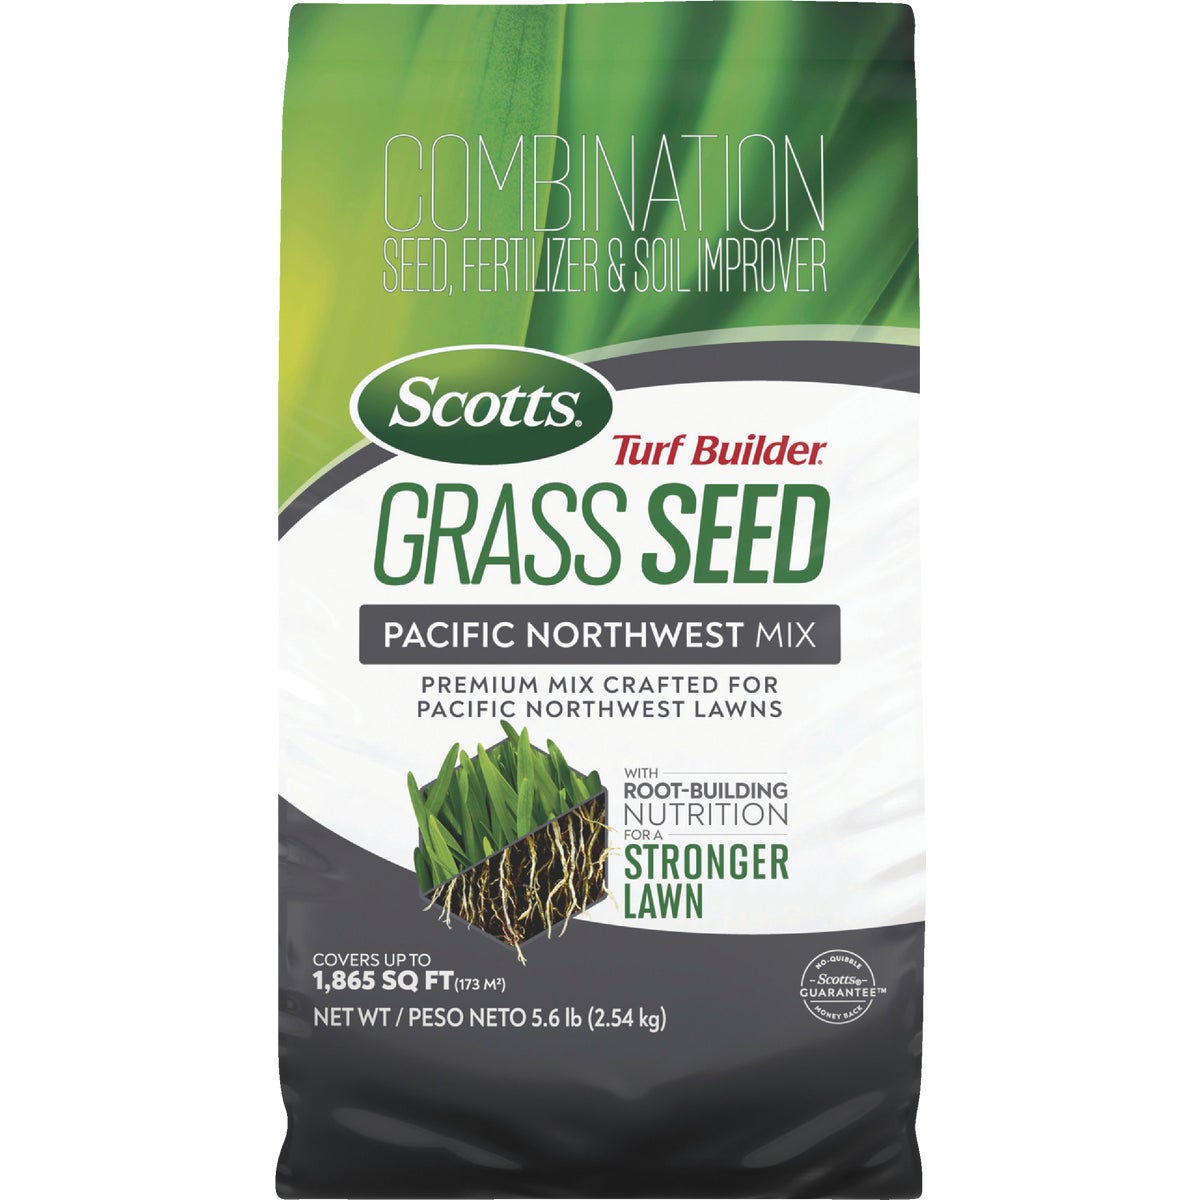 Scotts Turf Builder 5.6 Lb. 465 Sq. Ft. Pacific Northwest Mix Grass Seed